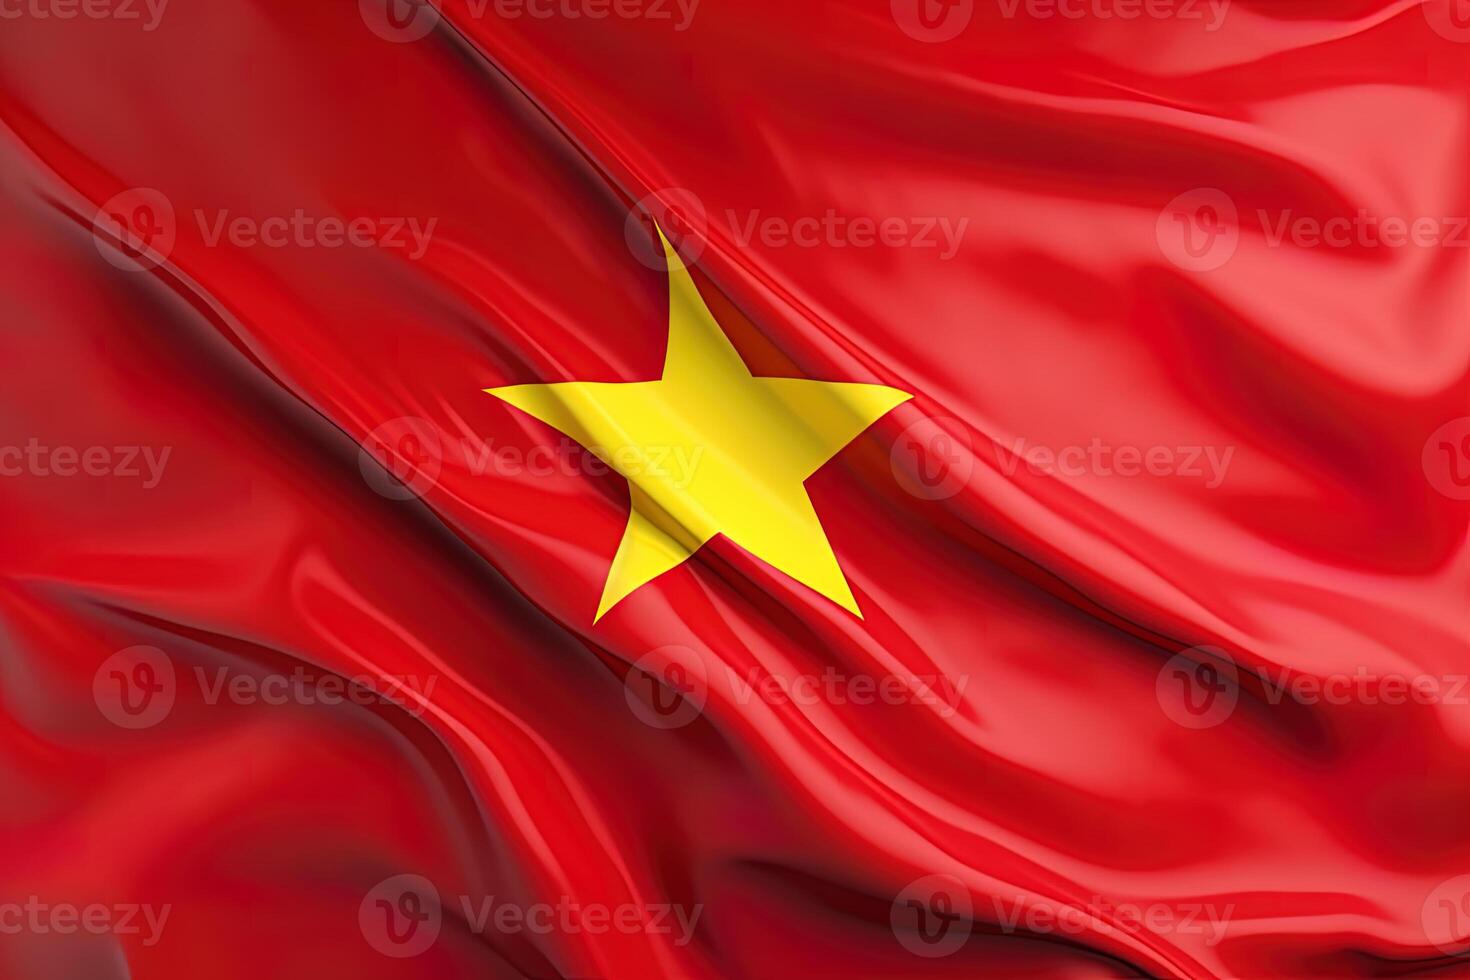 yellow star and red background, waving the national flag of Vietnam, waved a highly detailed close-up. photo